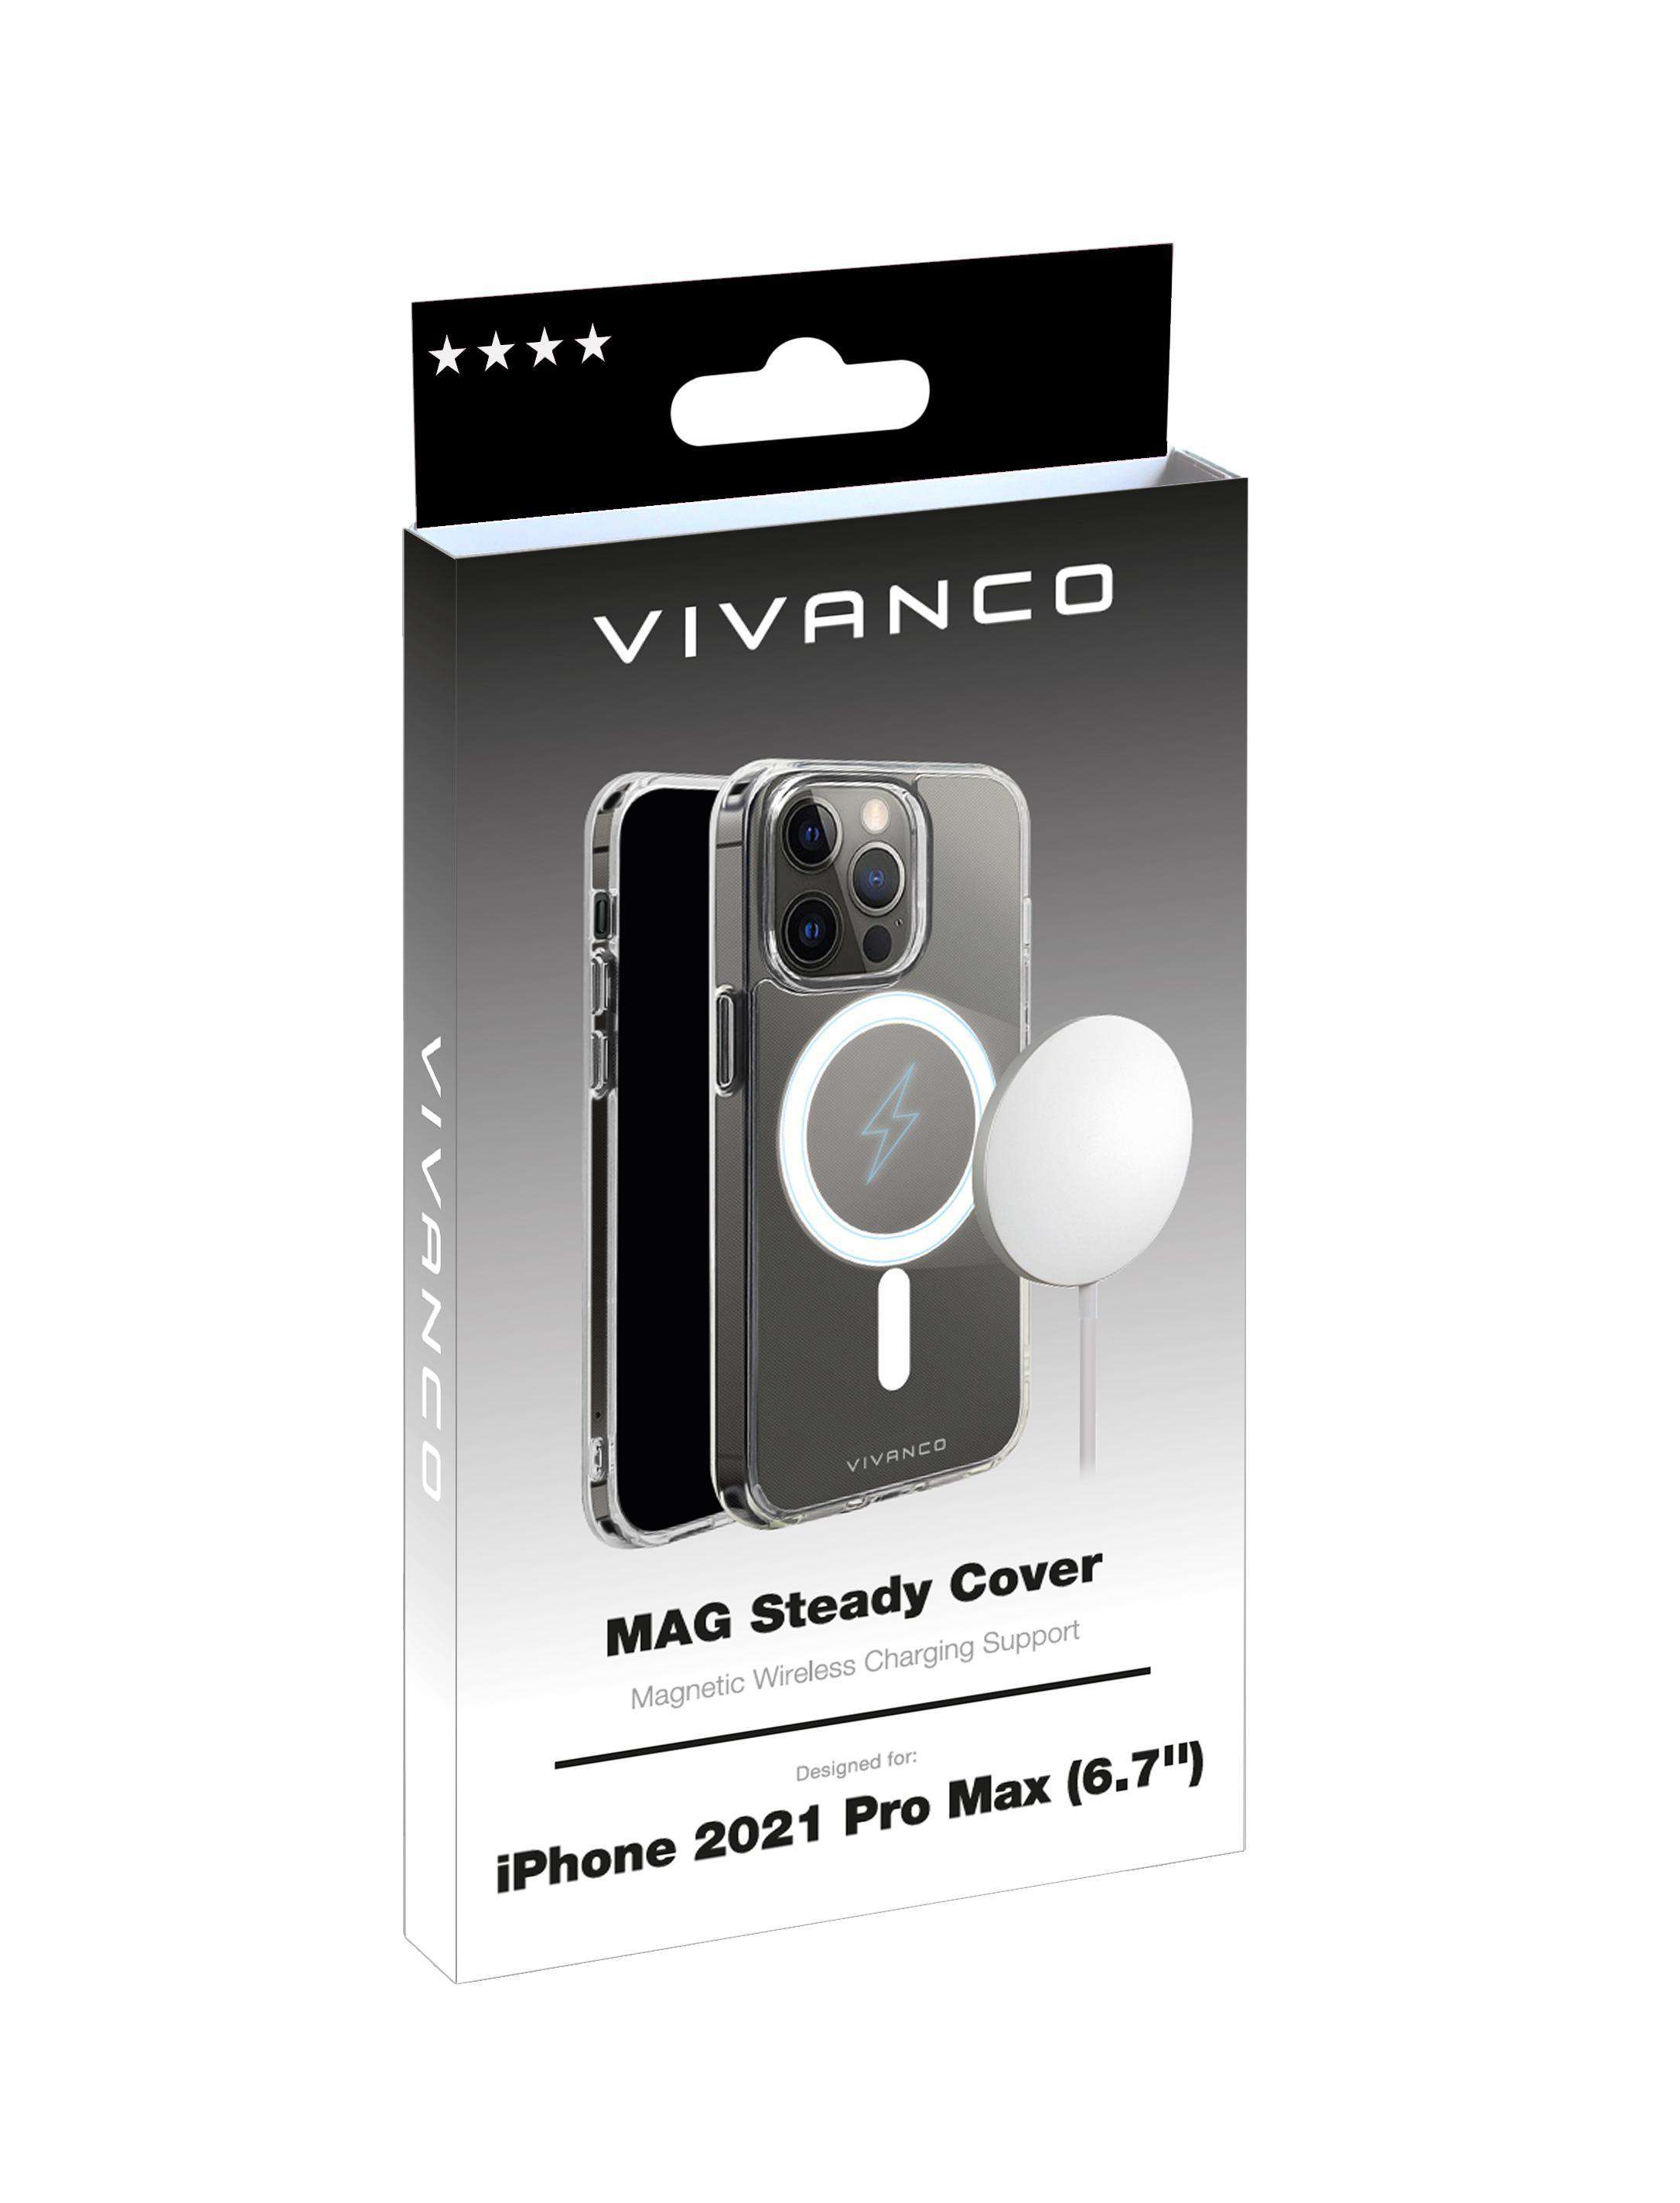 iPhone Apple, VIVANCO 13 Mag Transparent Steady, Backcover, Pro Max,